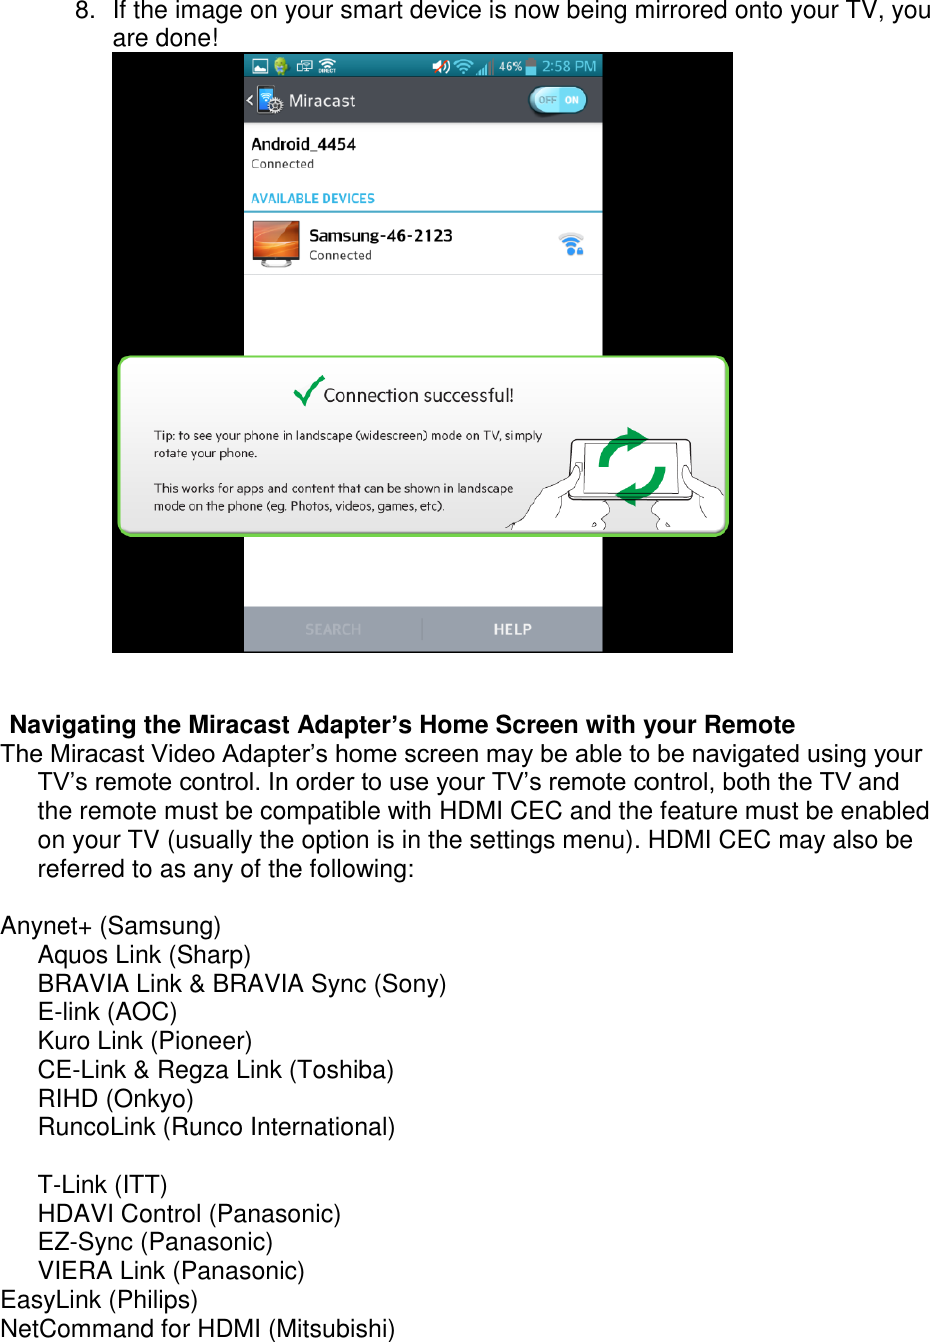  8.  If the image on your smart device is now being mirrored onto your TV, you are done!    Navigating the Miracast Adapter’s Home Screen with your Remote The Miracast Video Adapter’s home screen may be able to be navigated using your TV’s remote control. In order to use your TV’s remote control, both the TV and the remote must be compatible with HDMI CEC and the feature must be enabled on your TV (usually the option is in the settings menu). HDMI CEC may also be referred to as any of the following:   Anynet+ (Samsung) Aquos Link (Sharp)  BRAVIA Link &amp; BRAVIA Sync (Sony) E-link (AOC)  Kuro Link (Pioneer) CE-Link &amp; Regza Link (Toshiba) RIHD (Onkyo) RuncoLink (Runco International)  T-Link (ITT) HDAVI Control (Panasonic) EZ-Sync (Panasonic) VIERA Link (Panasonic) EasyLink (Philips) NetCommand for HDMI (Mitsubishi)  